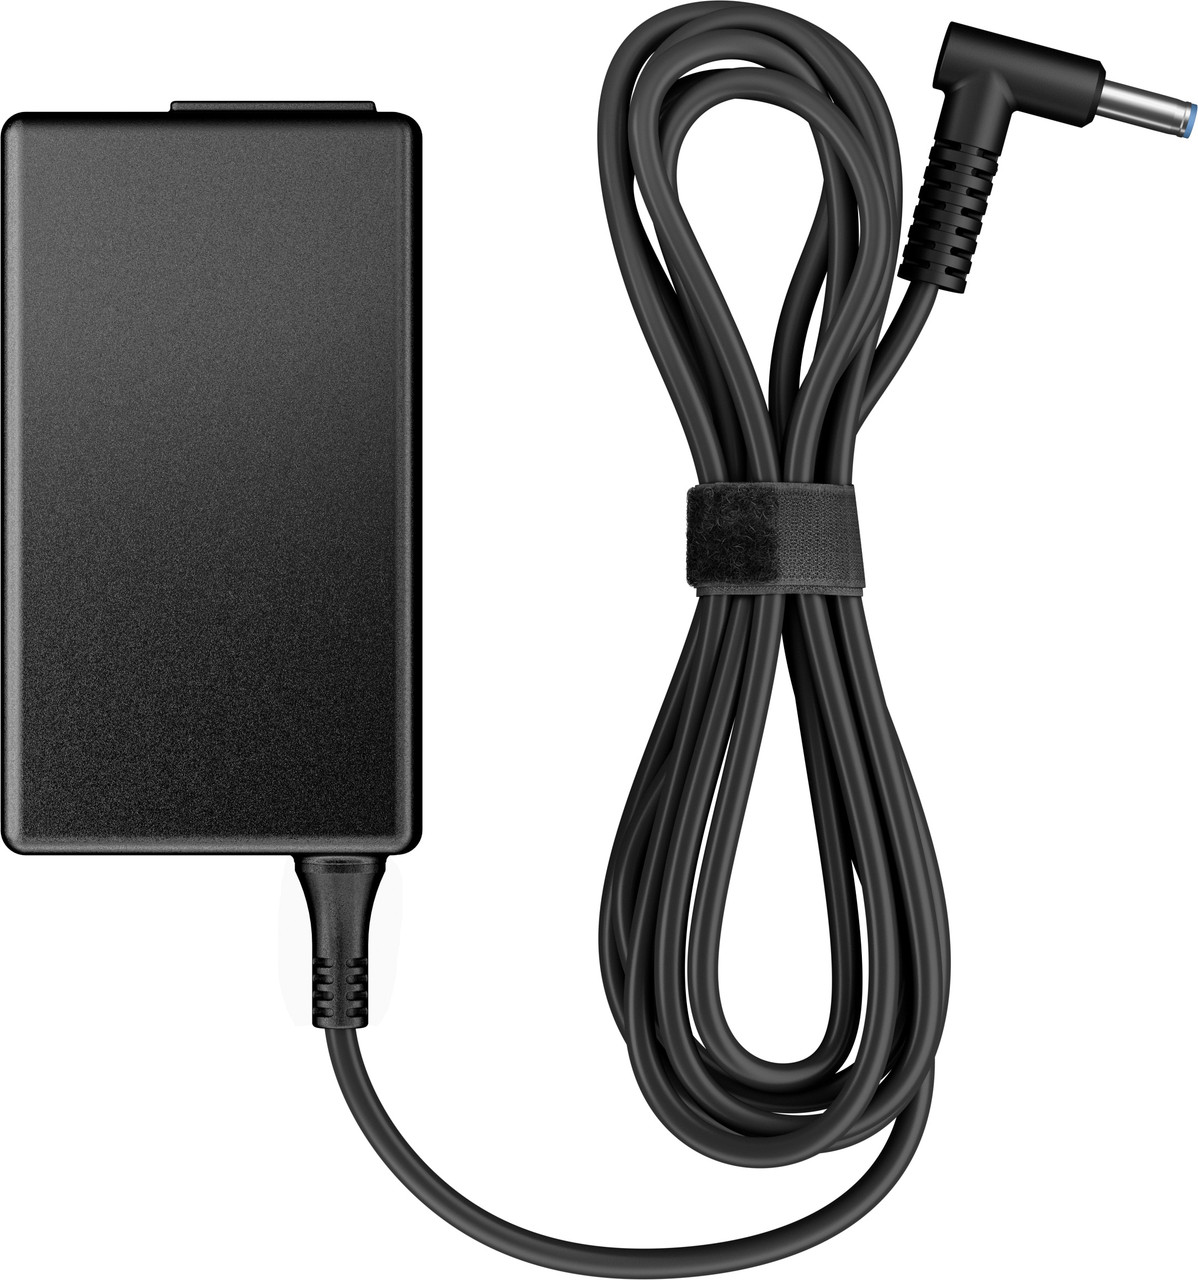 HP 65W Smart AC Adapter Top Down View